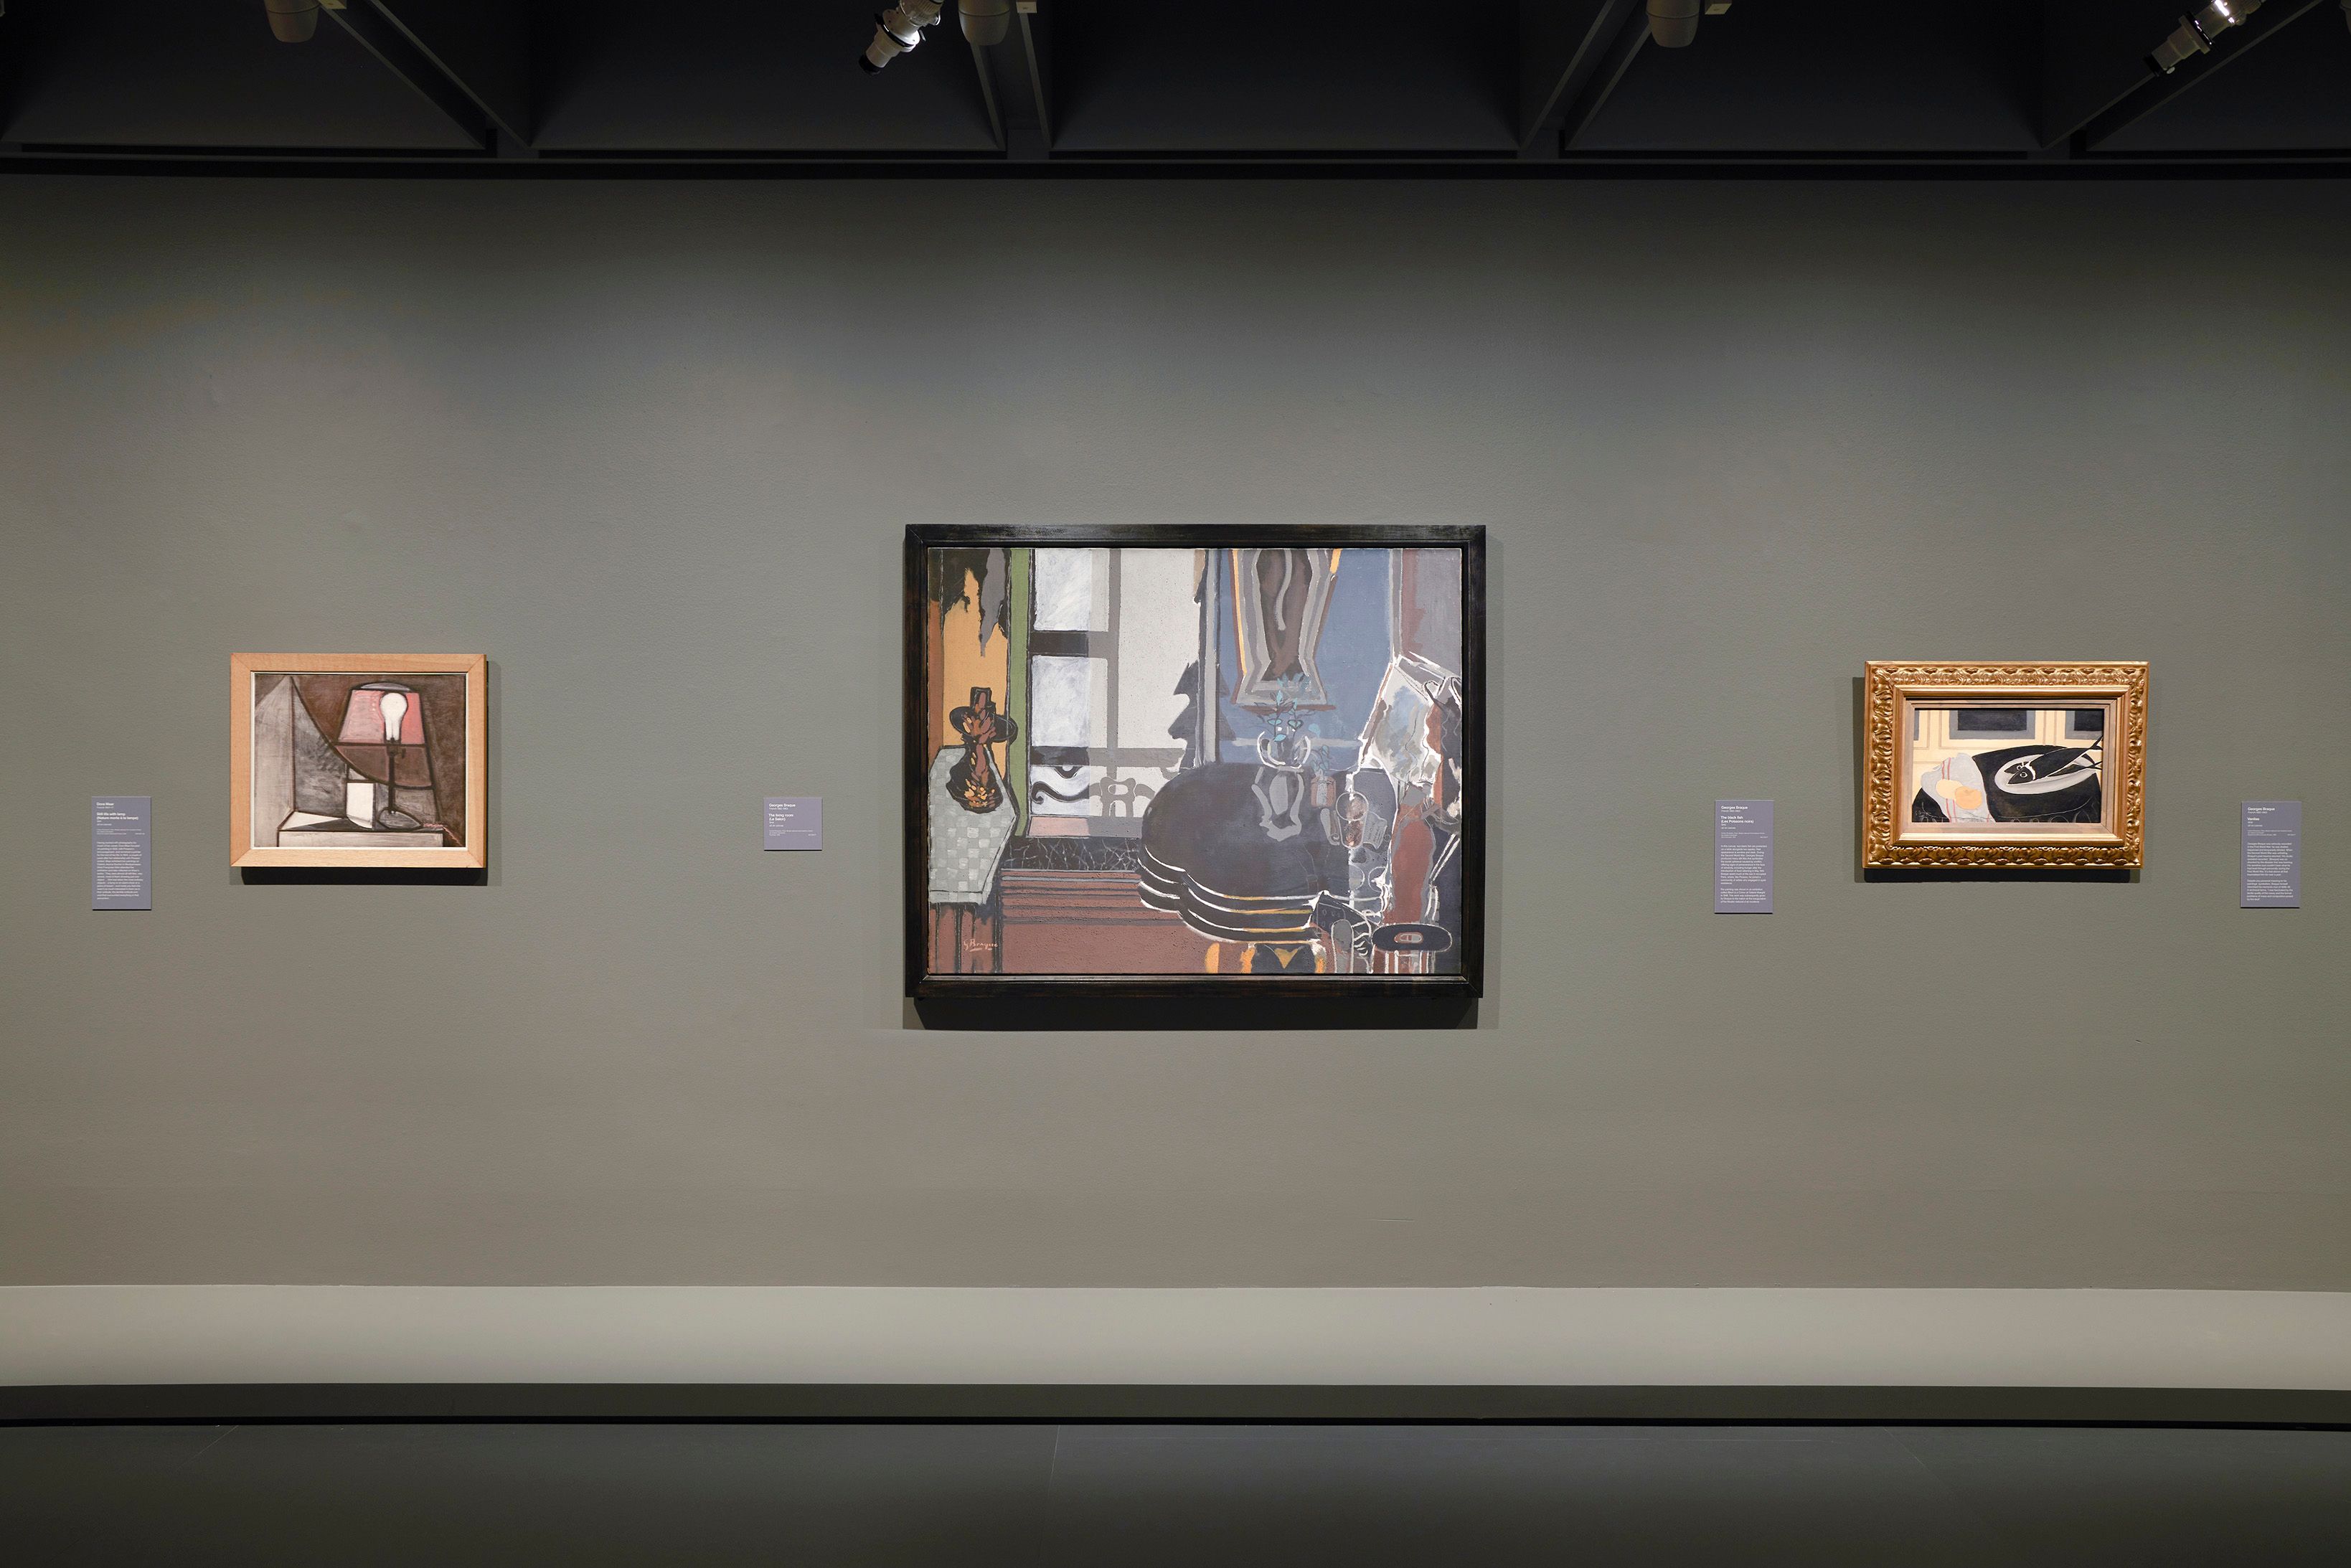 Installation view of <em>The Picasso Century</em> on display from 10 June-9 October 2022 at NGV International, Melbourne. Photo: Sean Fennessy